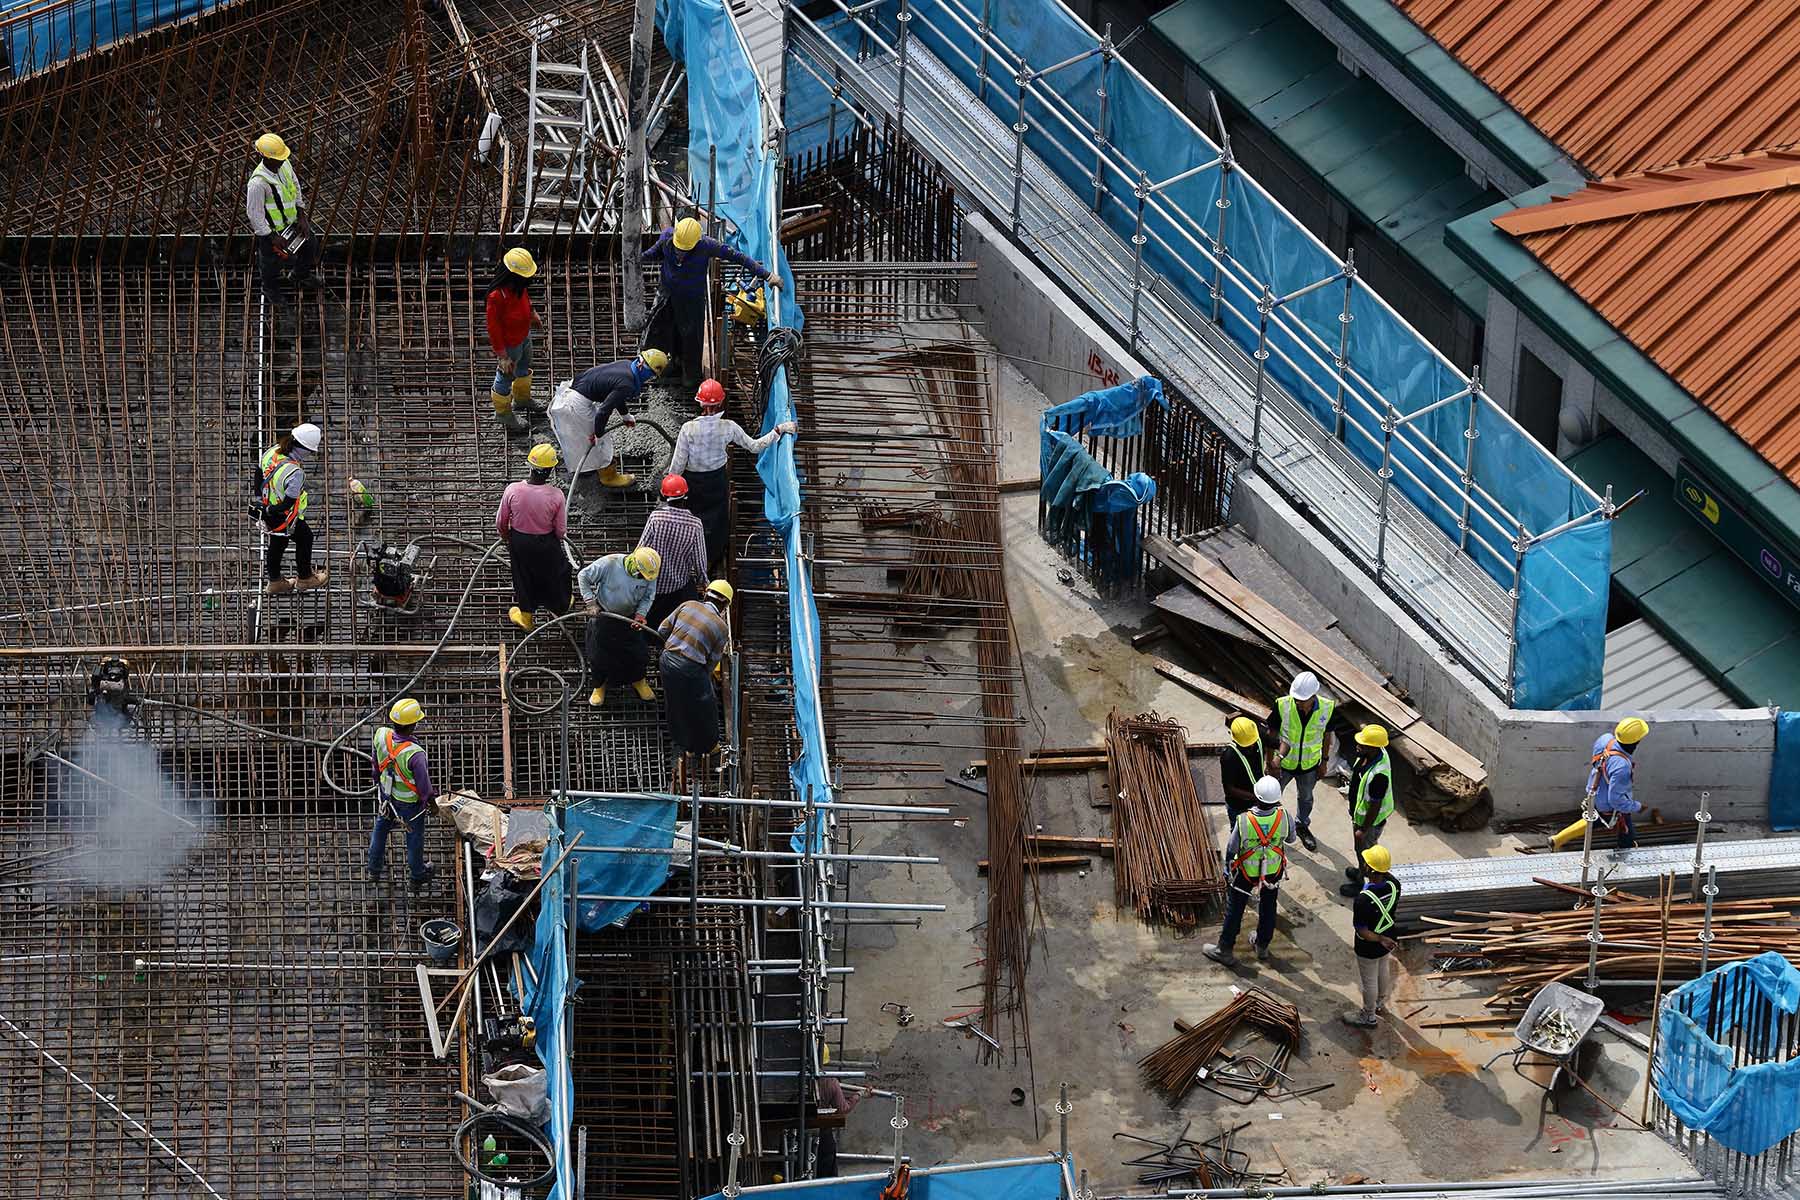 Migrant laborers work at a building construction site in Singapore.